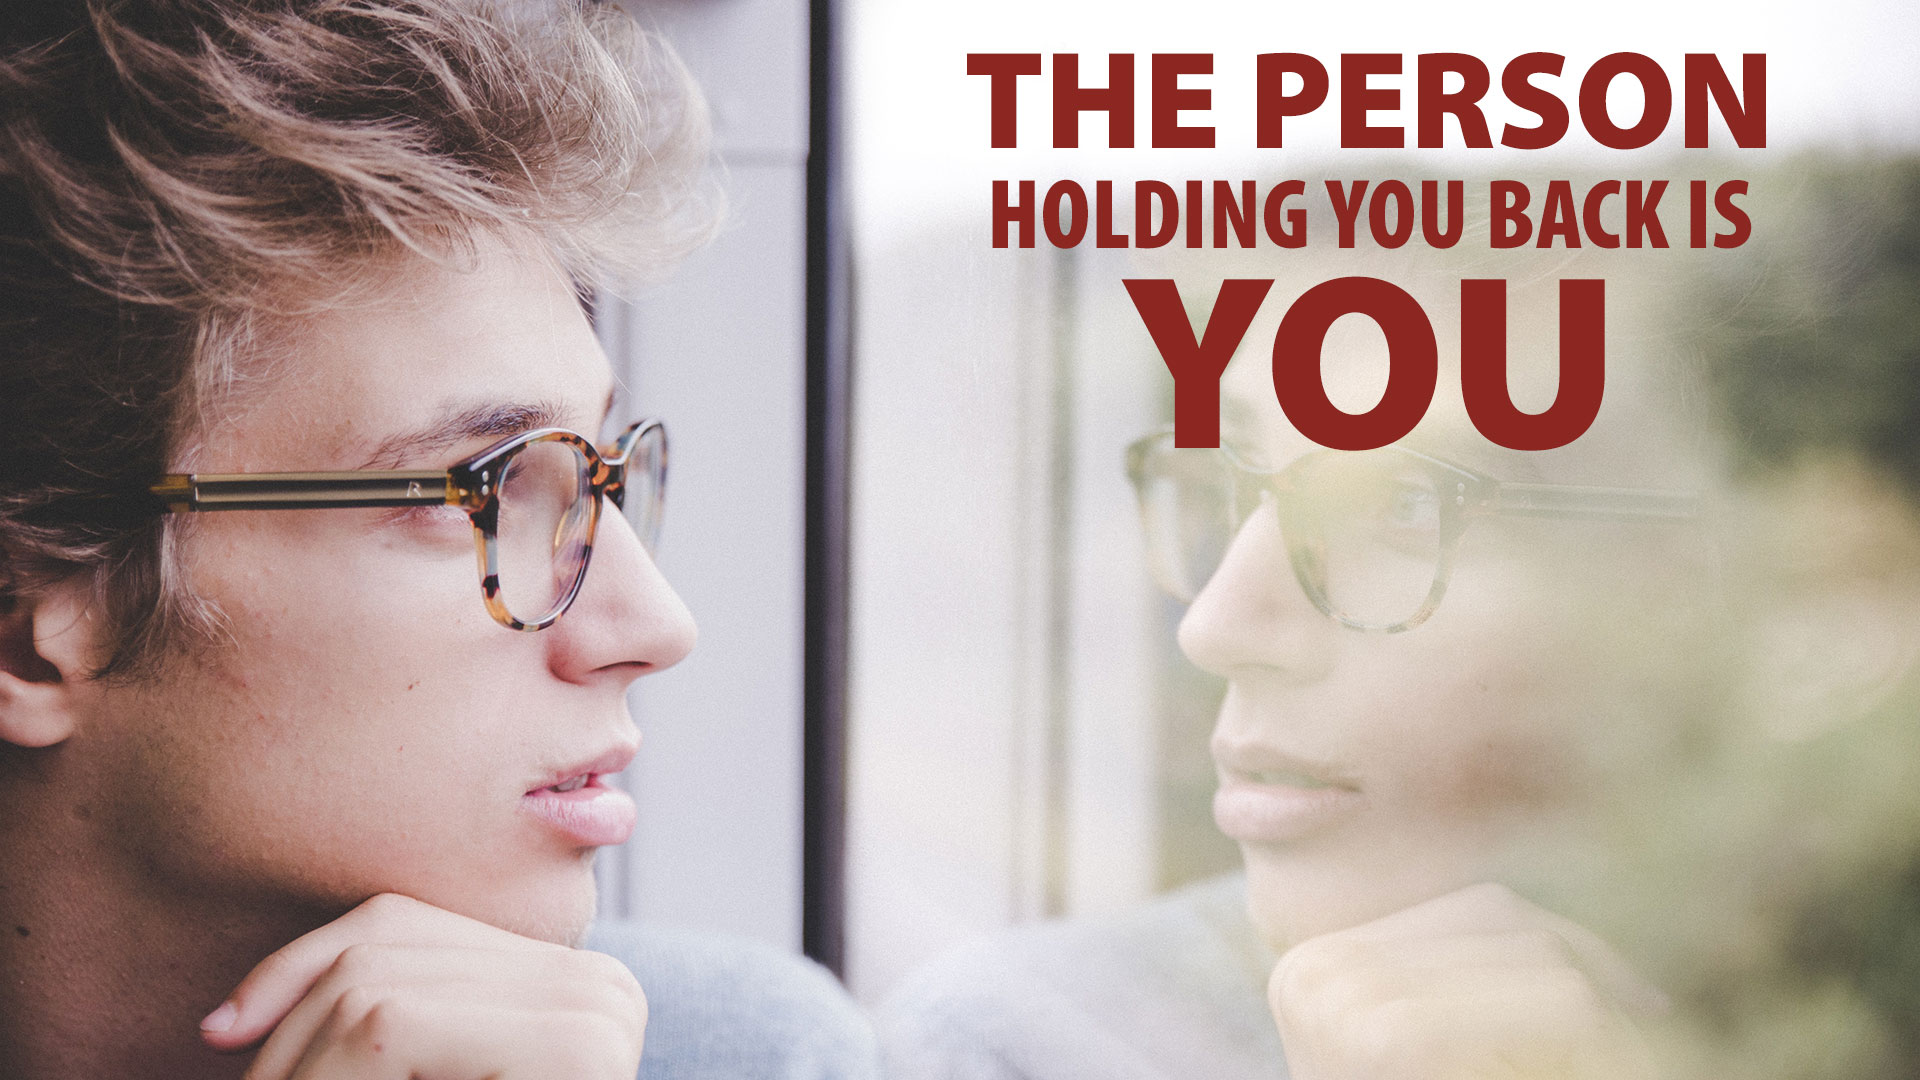 the person holding you back is you, john riley project